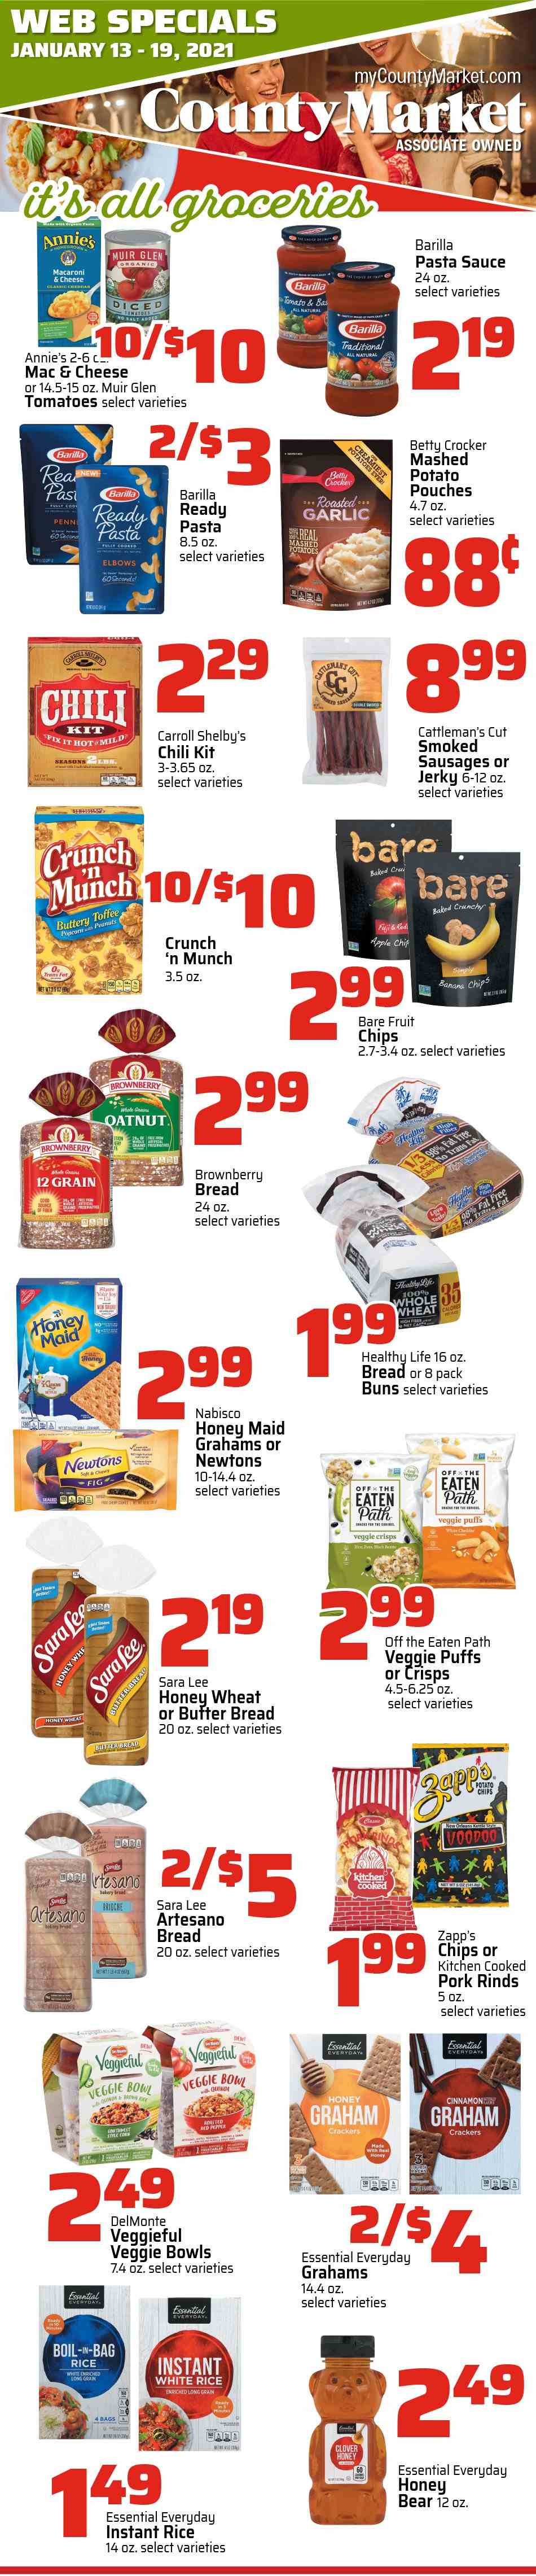 thumbnail - County Market Flyer - 01/13/2021 - 01/19/2021 - Sales products - brioche, Sara Lee, bread, puffs, buns, macaroni & cheese, mashed potatoes, sauce, Barilla, Annie's, jerky, sausage, cheddar, Clover, peas, beans, corn, crackers, toffee, potato chips, popcorn, snack, chips, garlic, Honey Maid, white rice, brown rice, quinoa, rice, pasta sauce. Page 4.